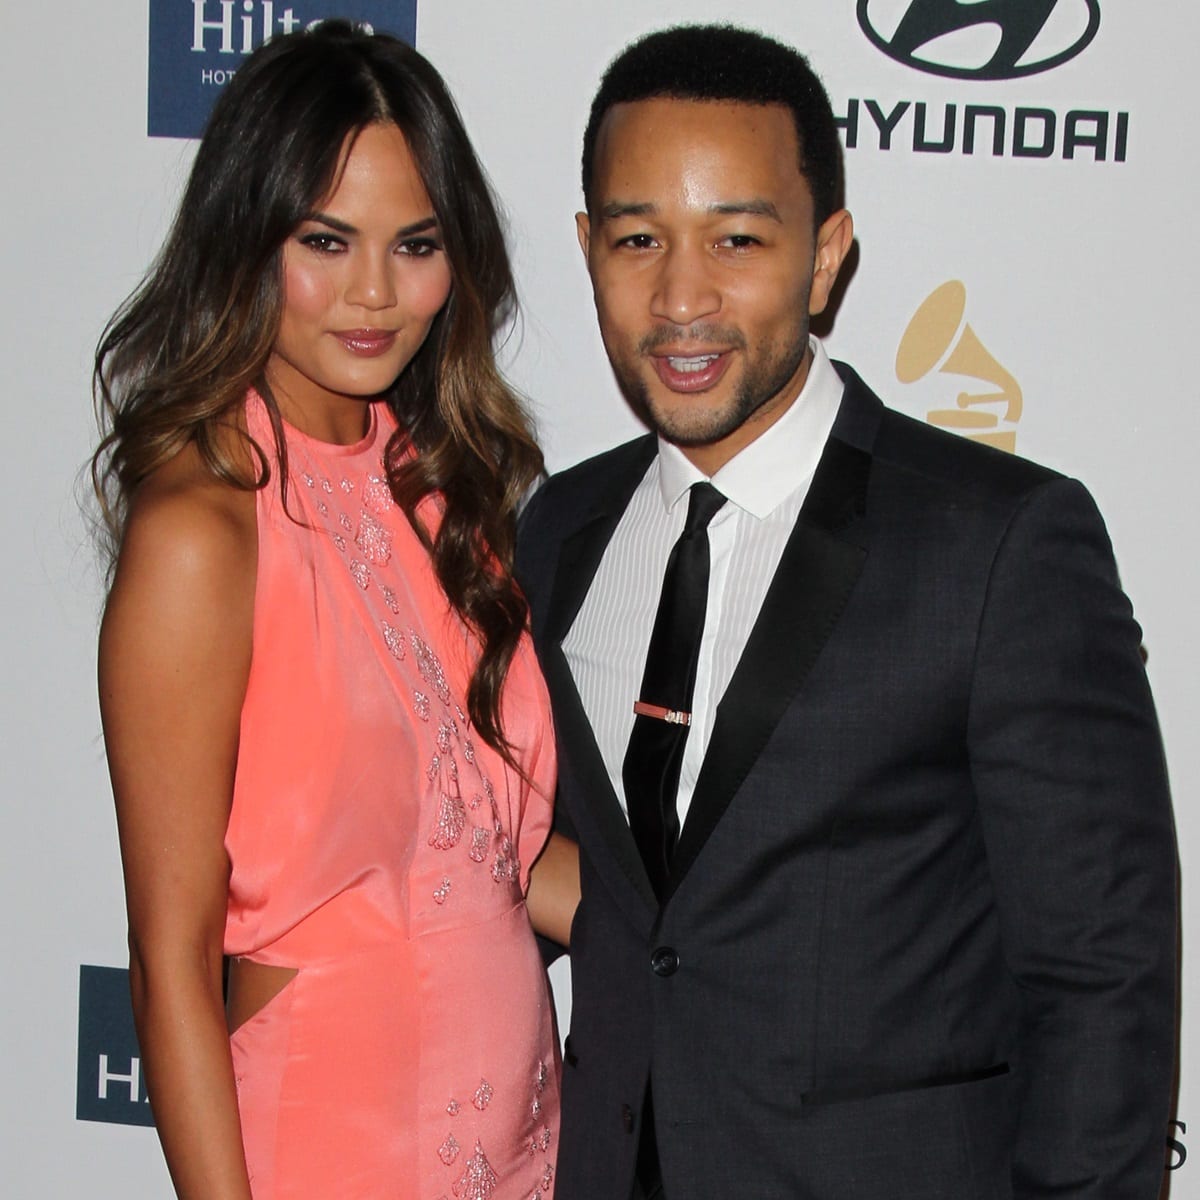 Chrissy Teigen and John Legend have an age difference of 8 years